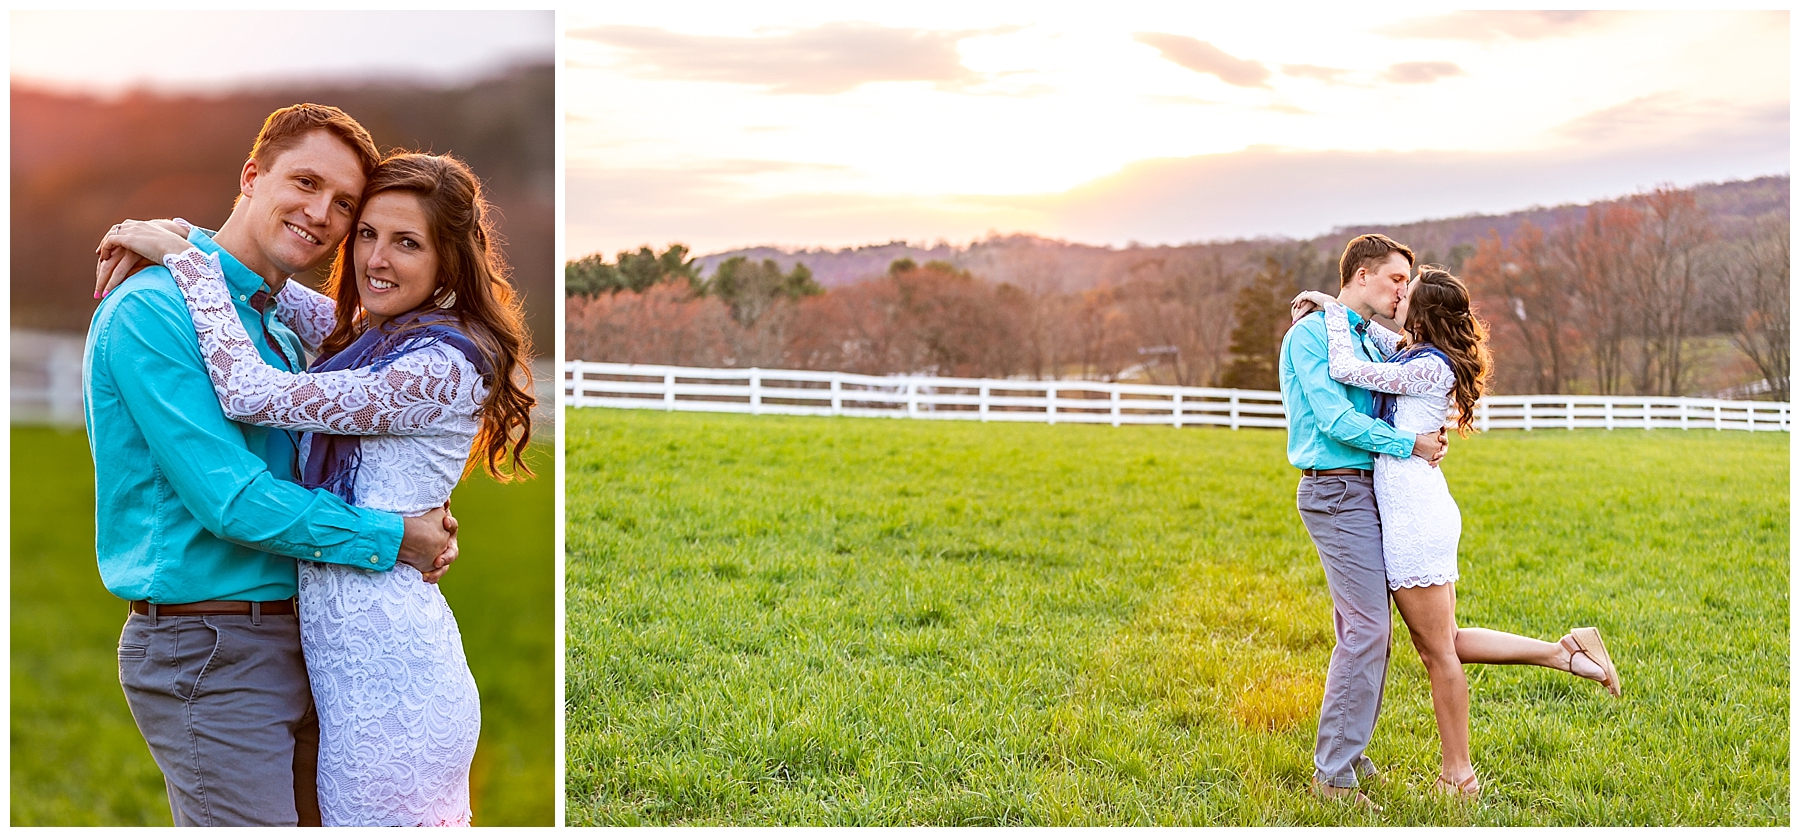 Chelsea Phil Private Estate Engagement Living Radiant Photography photos color_0046.jpg